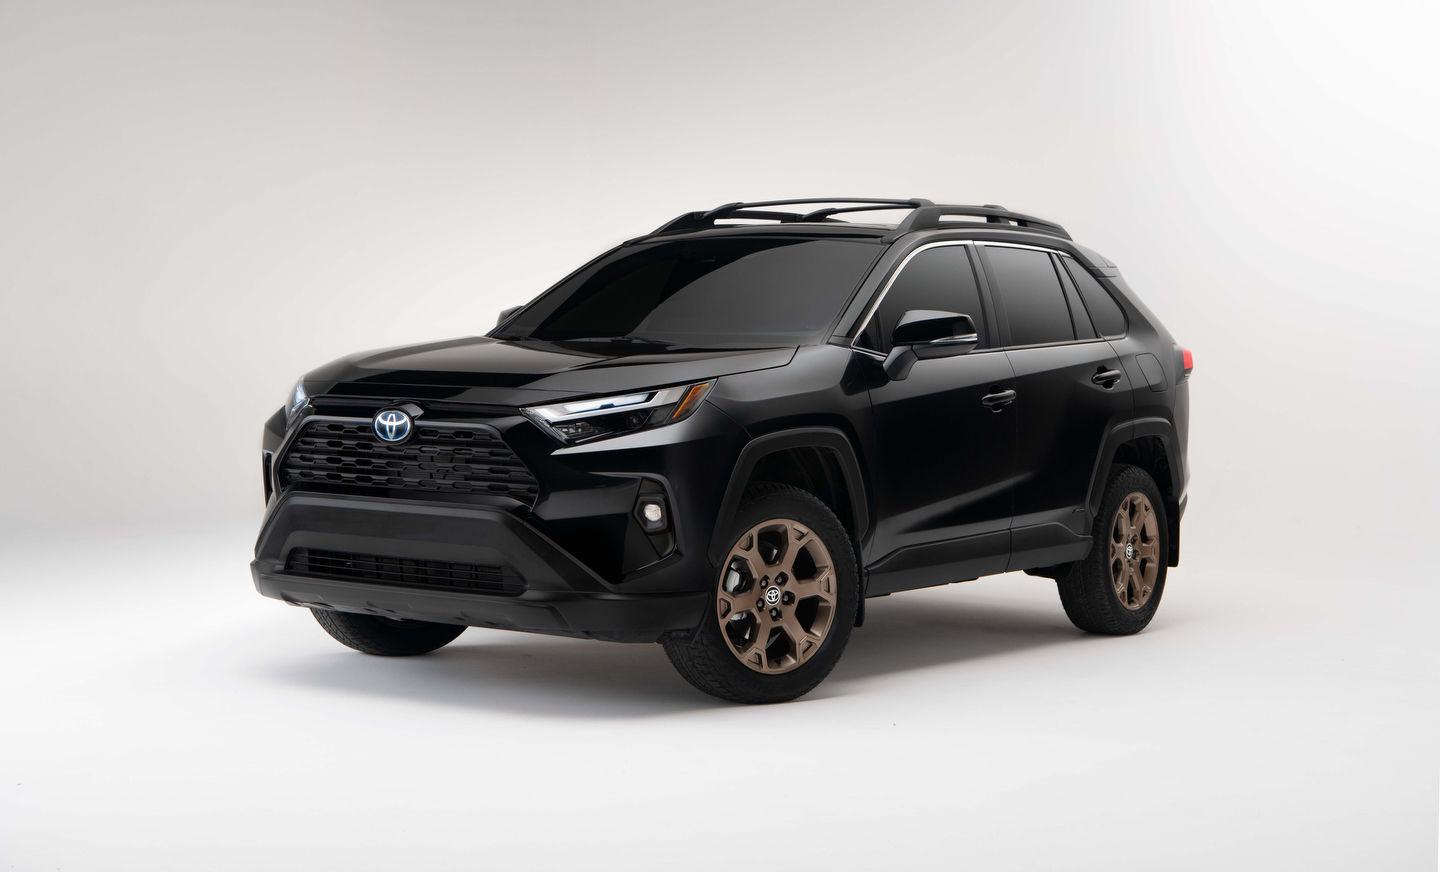 A look at the improvements on the new 2023 Toyota RAV4